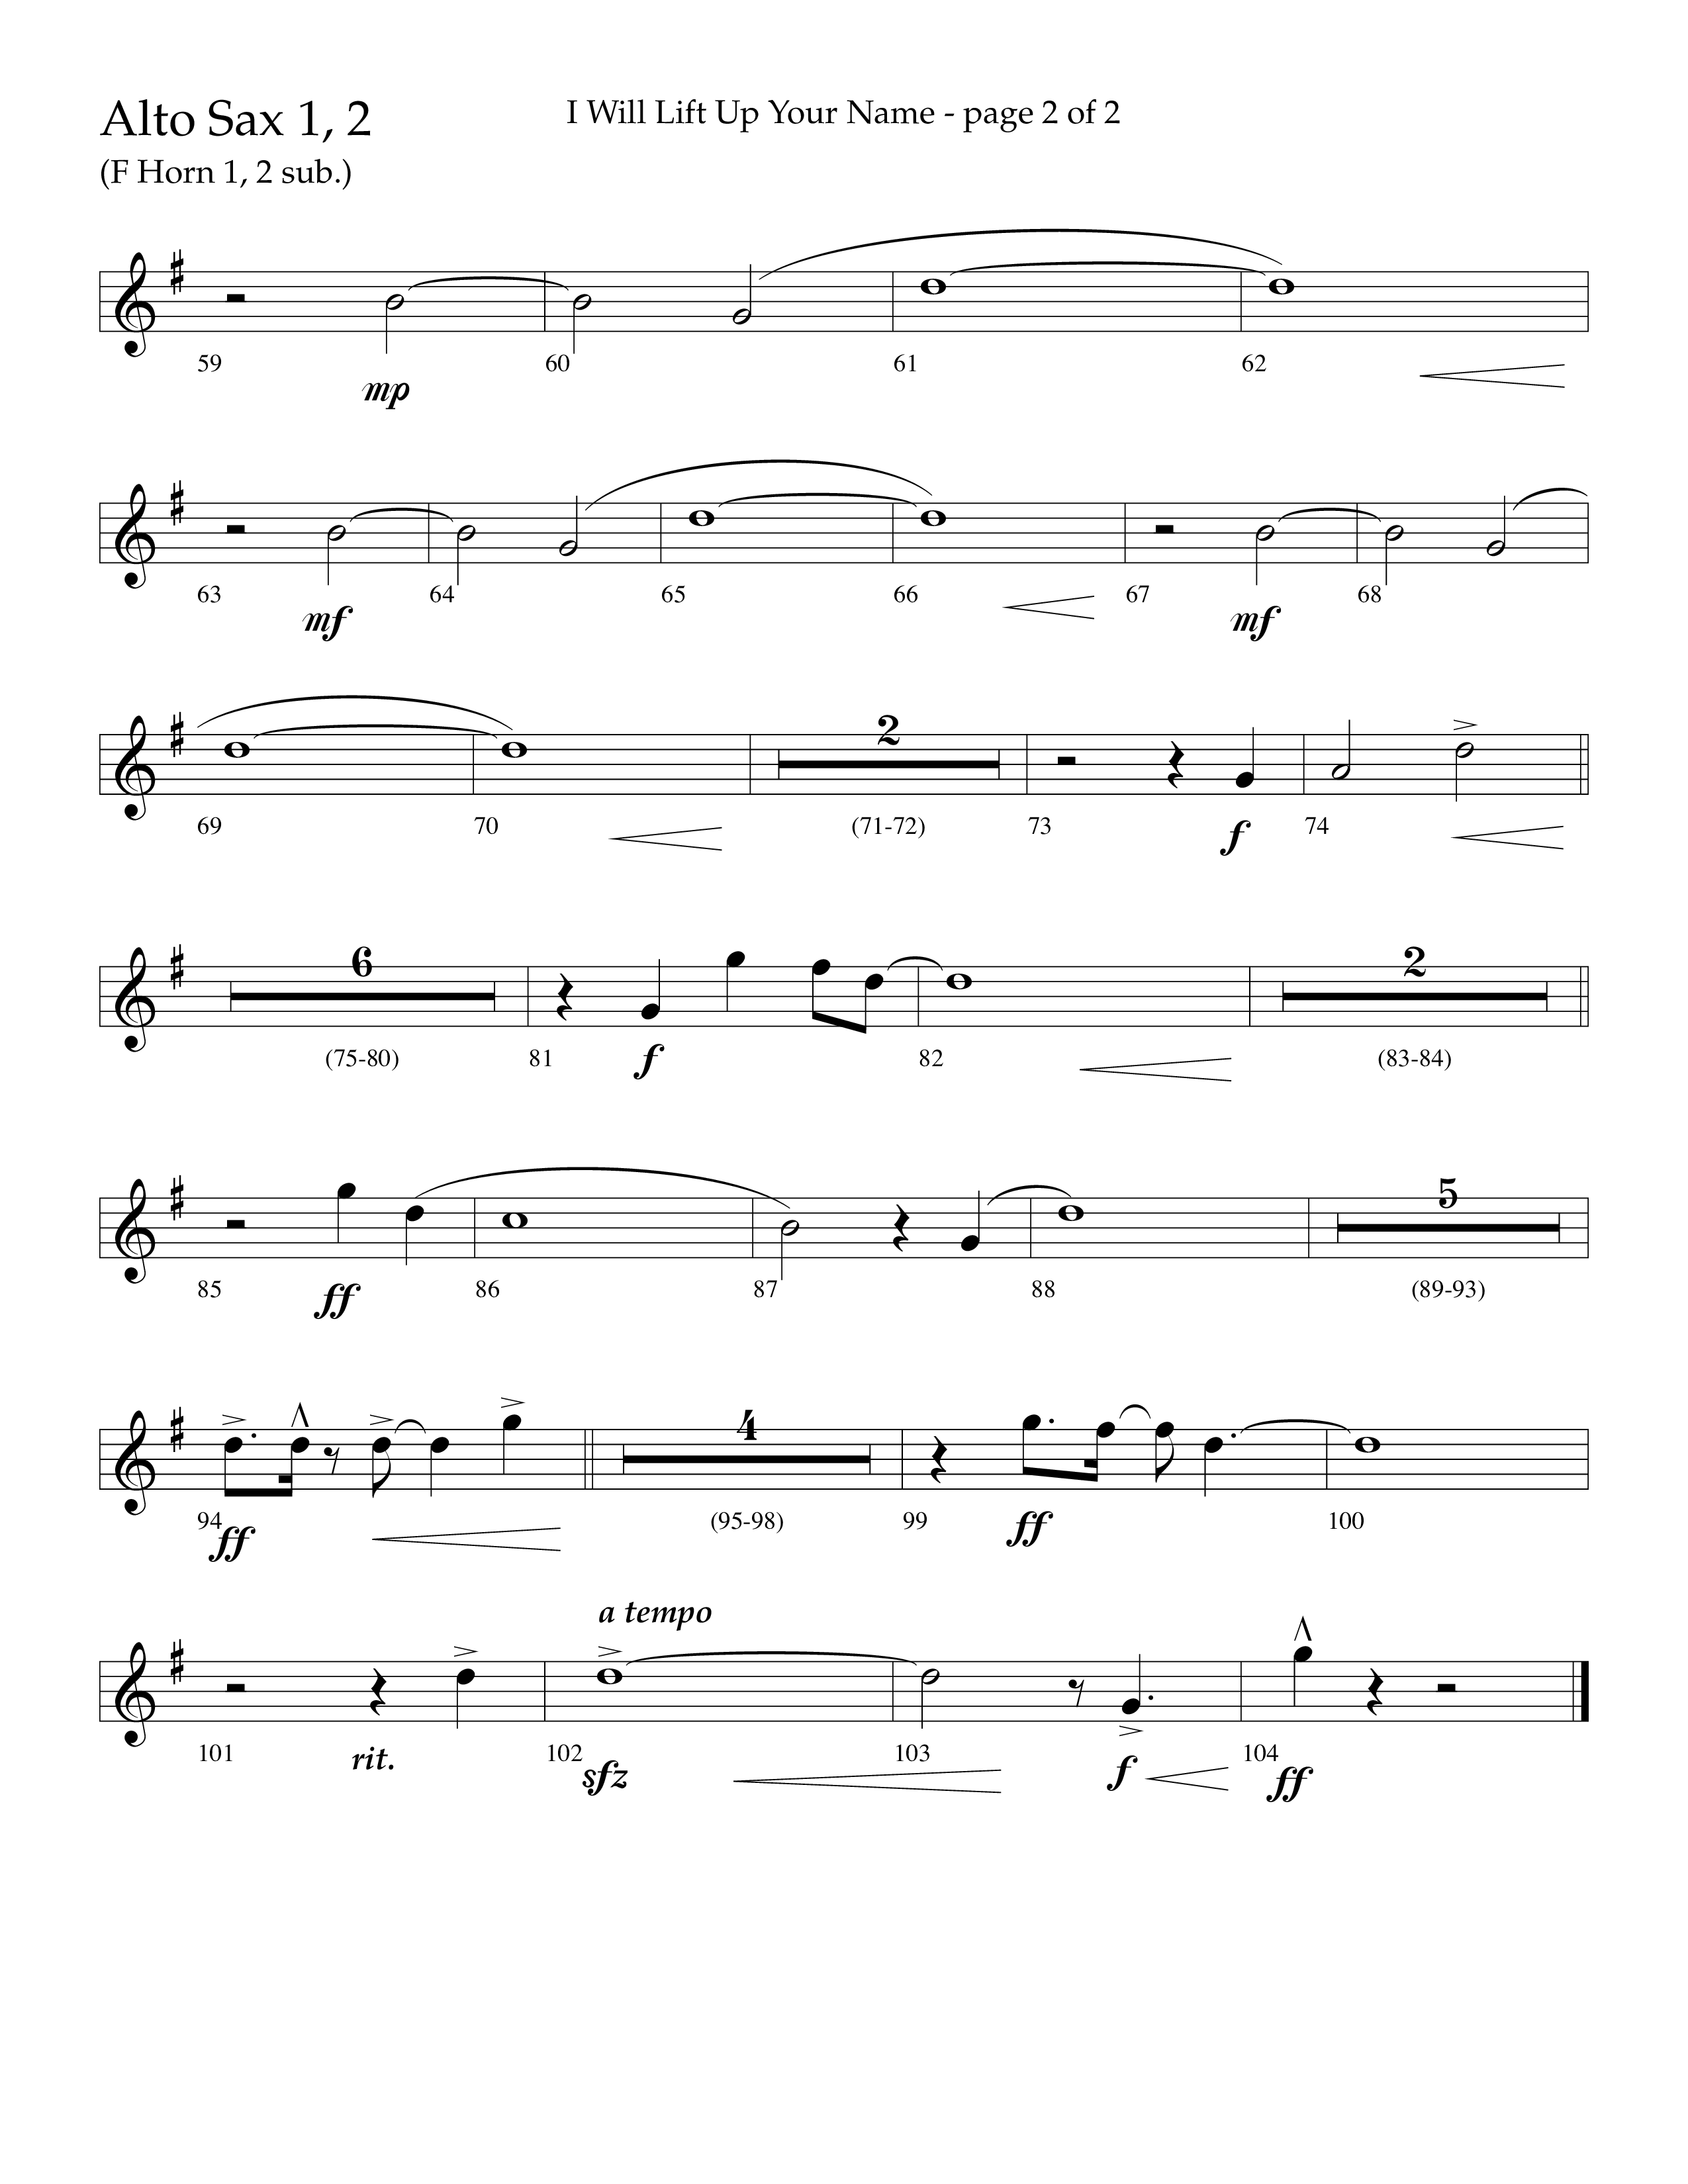 I Will Lift Up Your Name (Choral Anthem SATB) Alto Sax 1/2 (Lifeway Choral / Arr. John Bolin / Orch. Cliff Duren)